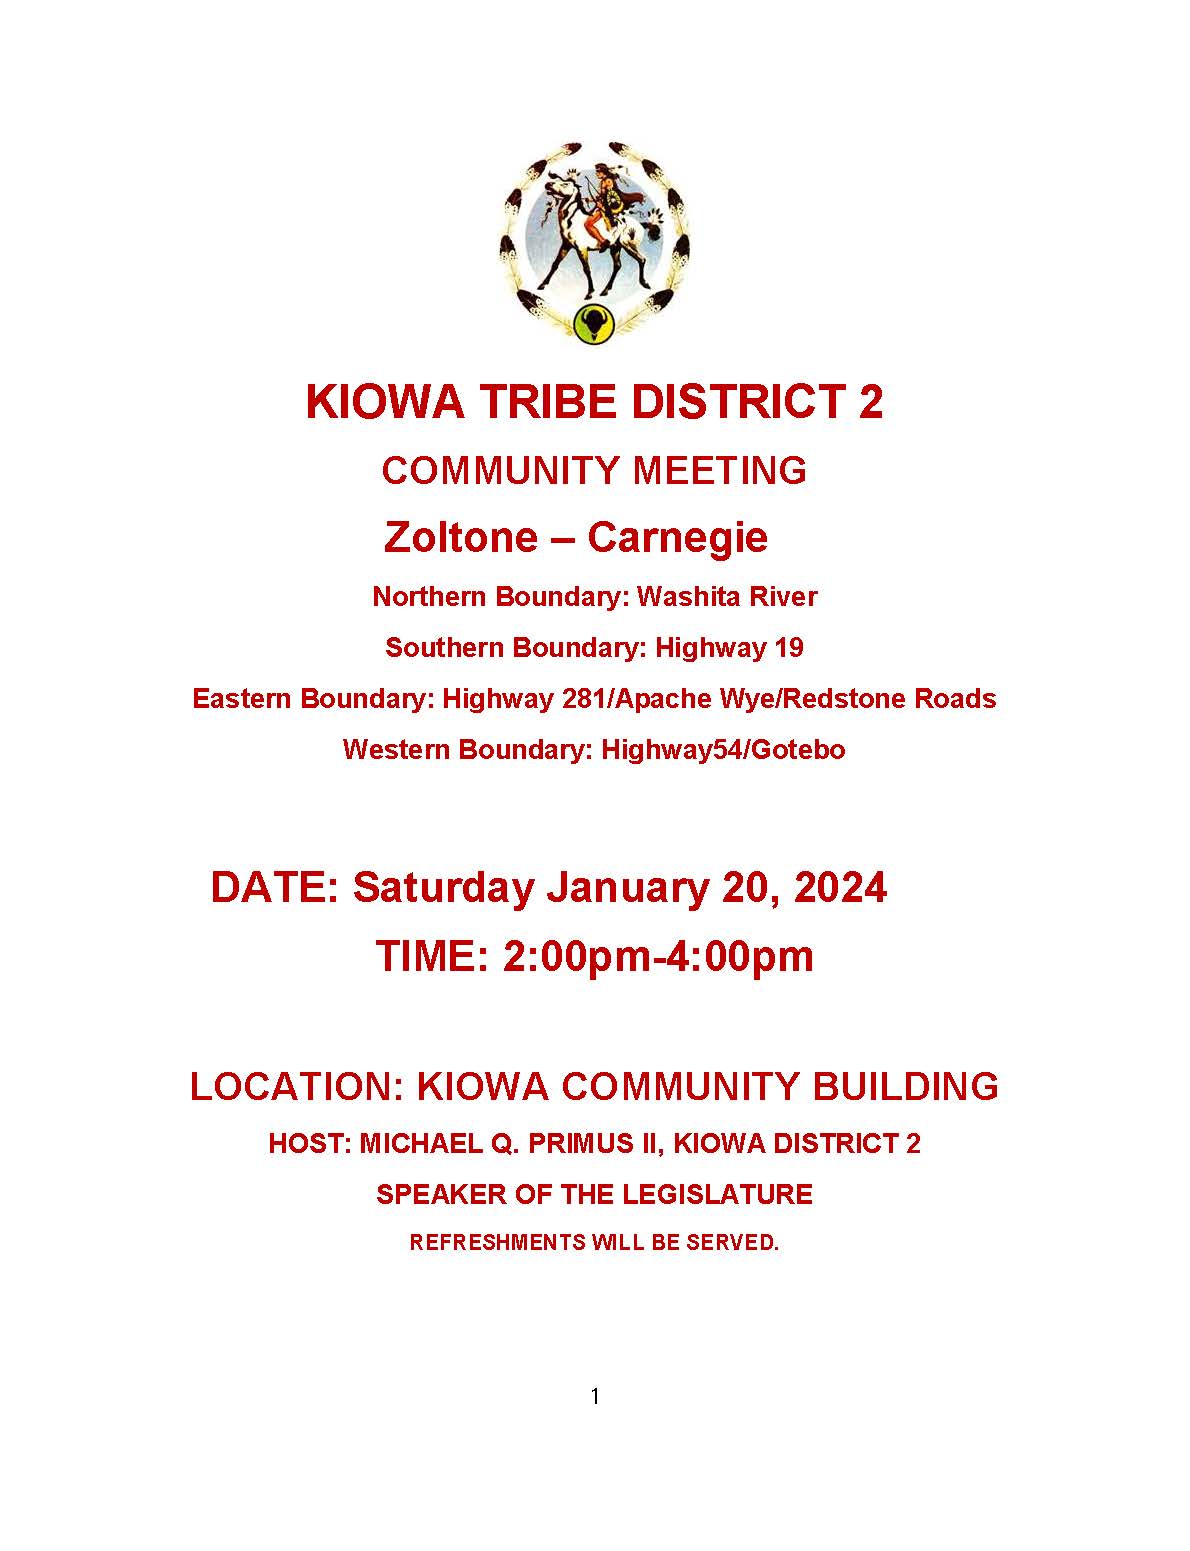 District 2 Community Meeting